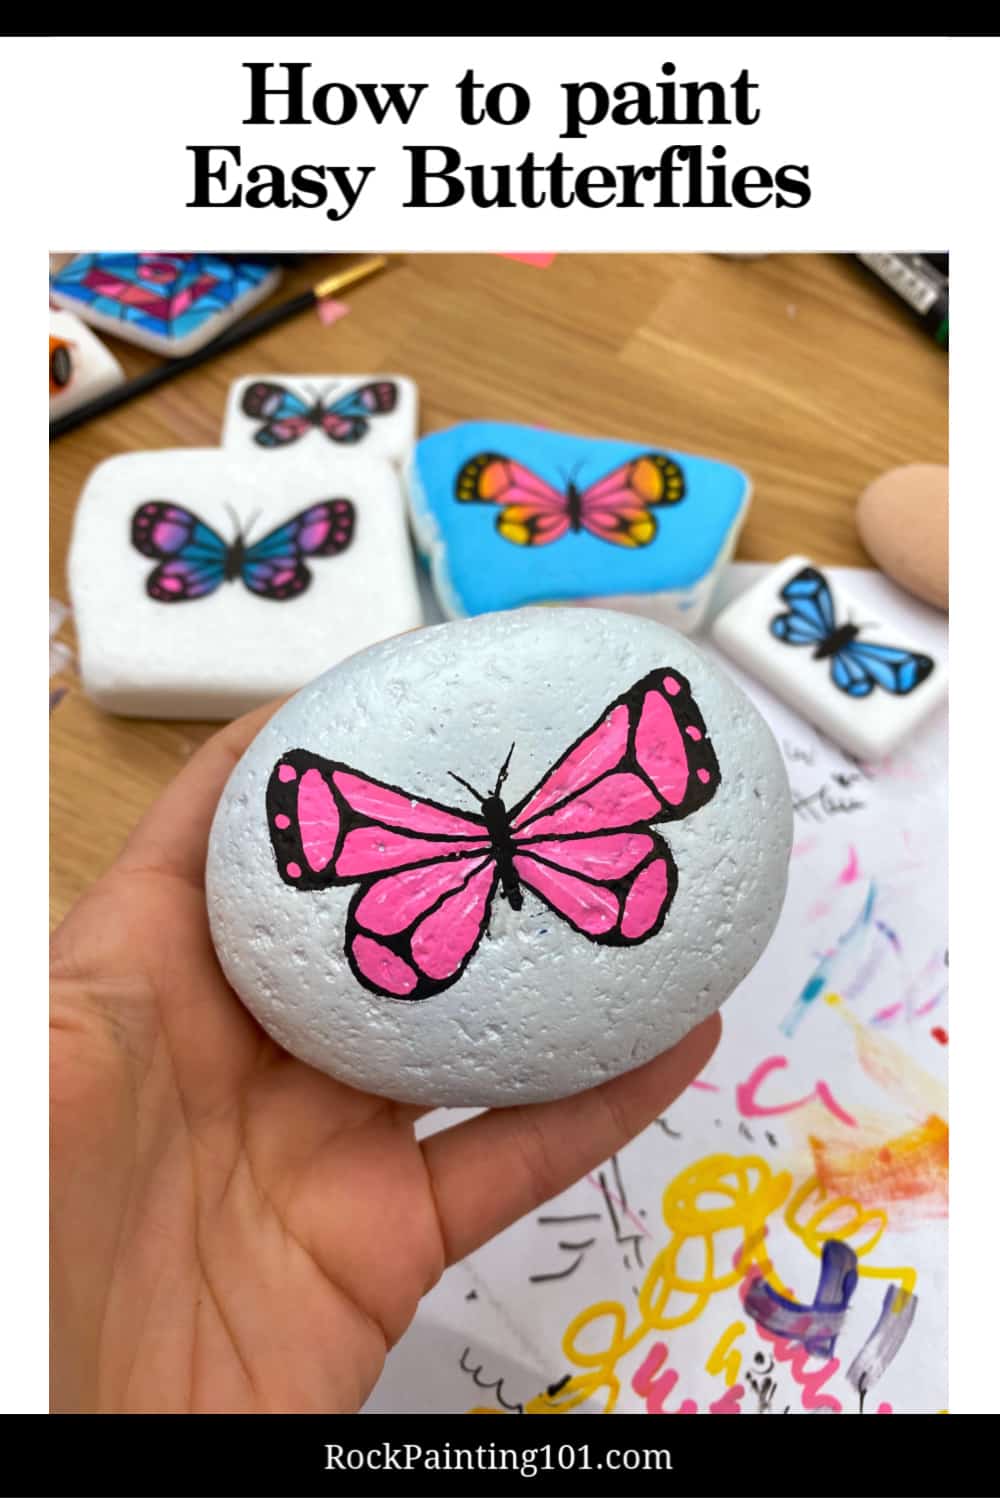 This video tutorial is great for learning how to paint butterflies or beginners! Now that the warm weather is here, who says that you can't make and create your own butterflies for your outdoor enjoyment? 